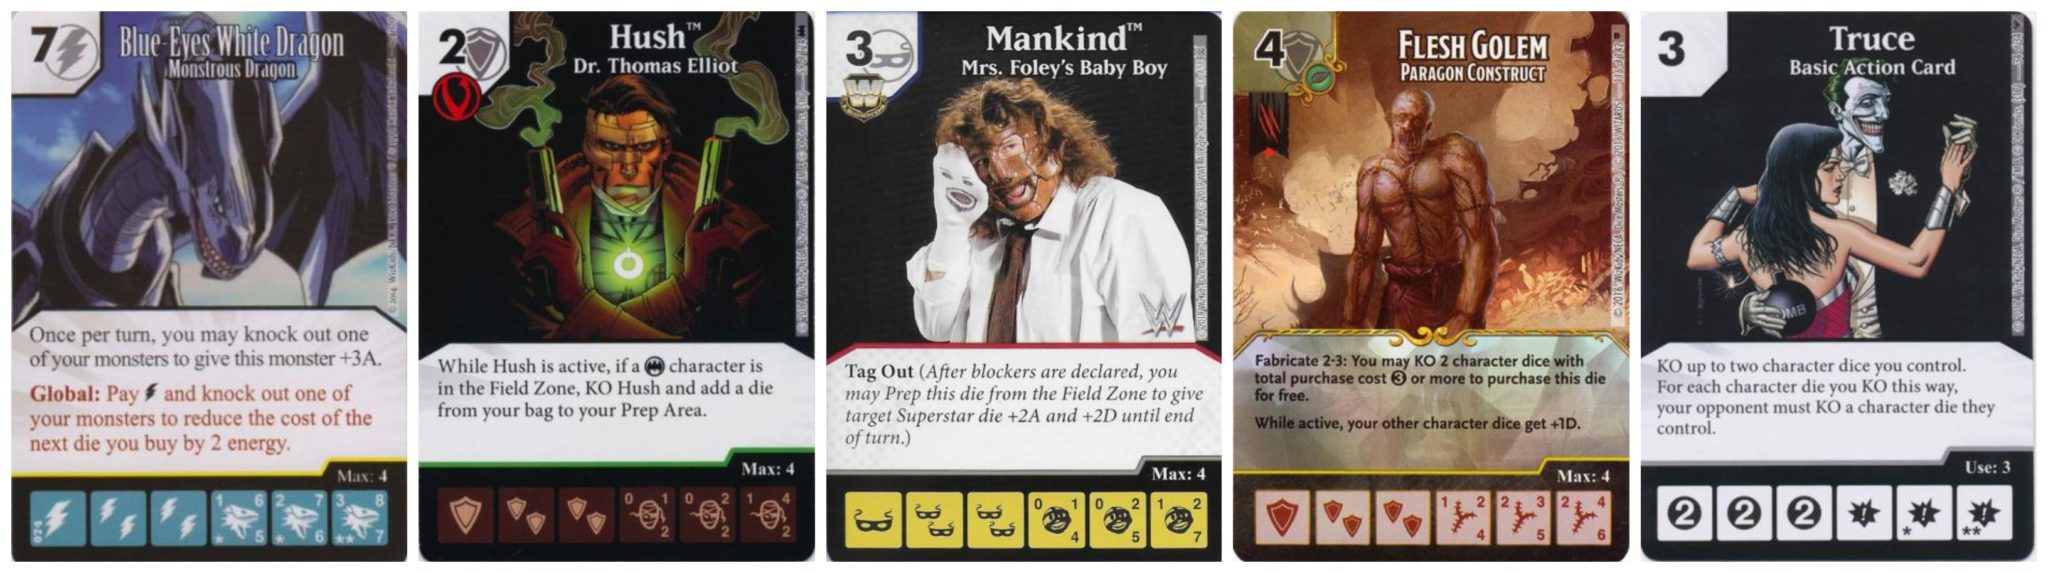 Manipulation Card Game Rules